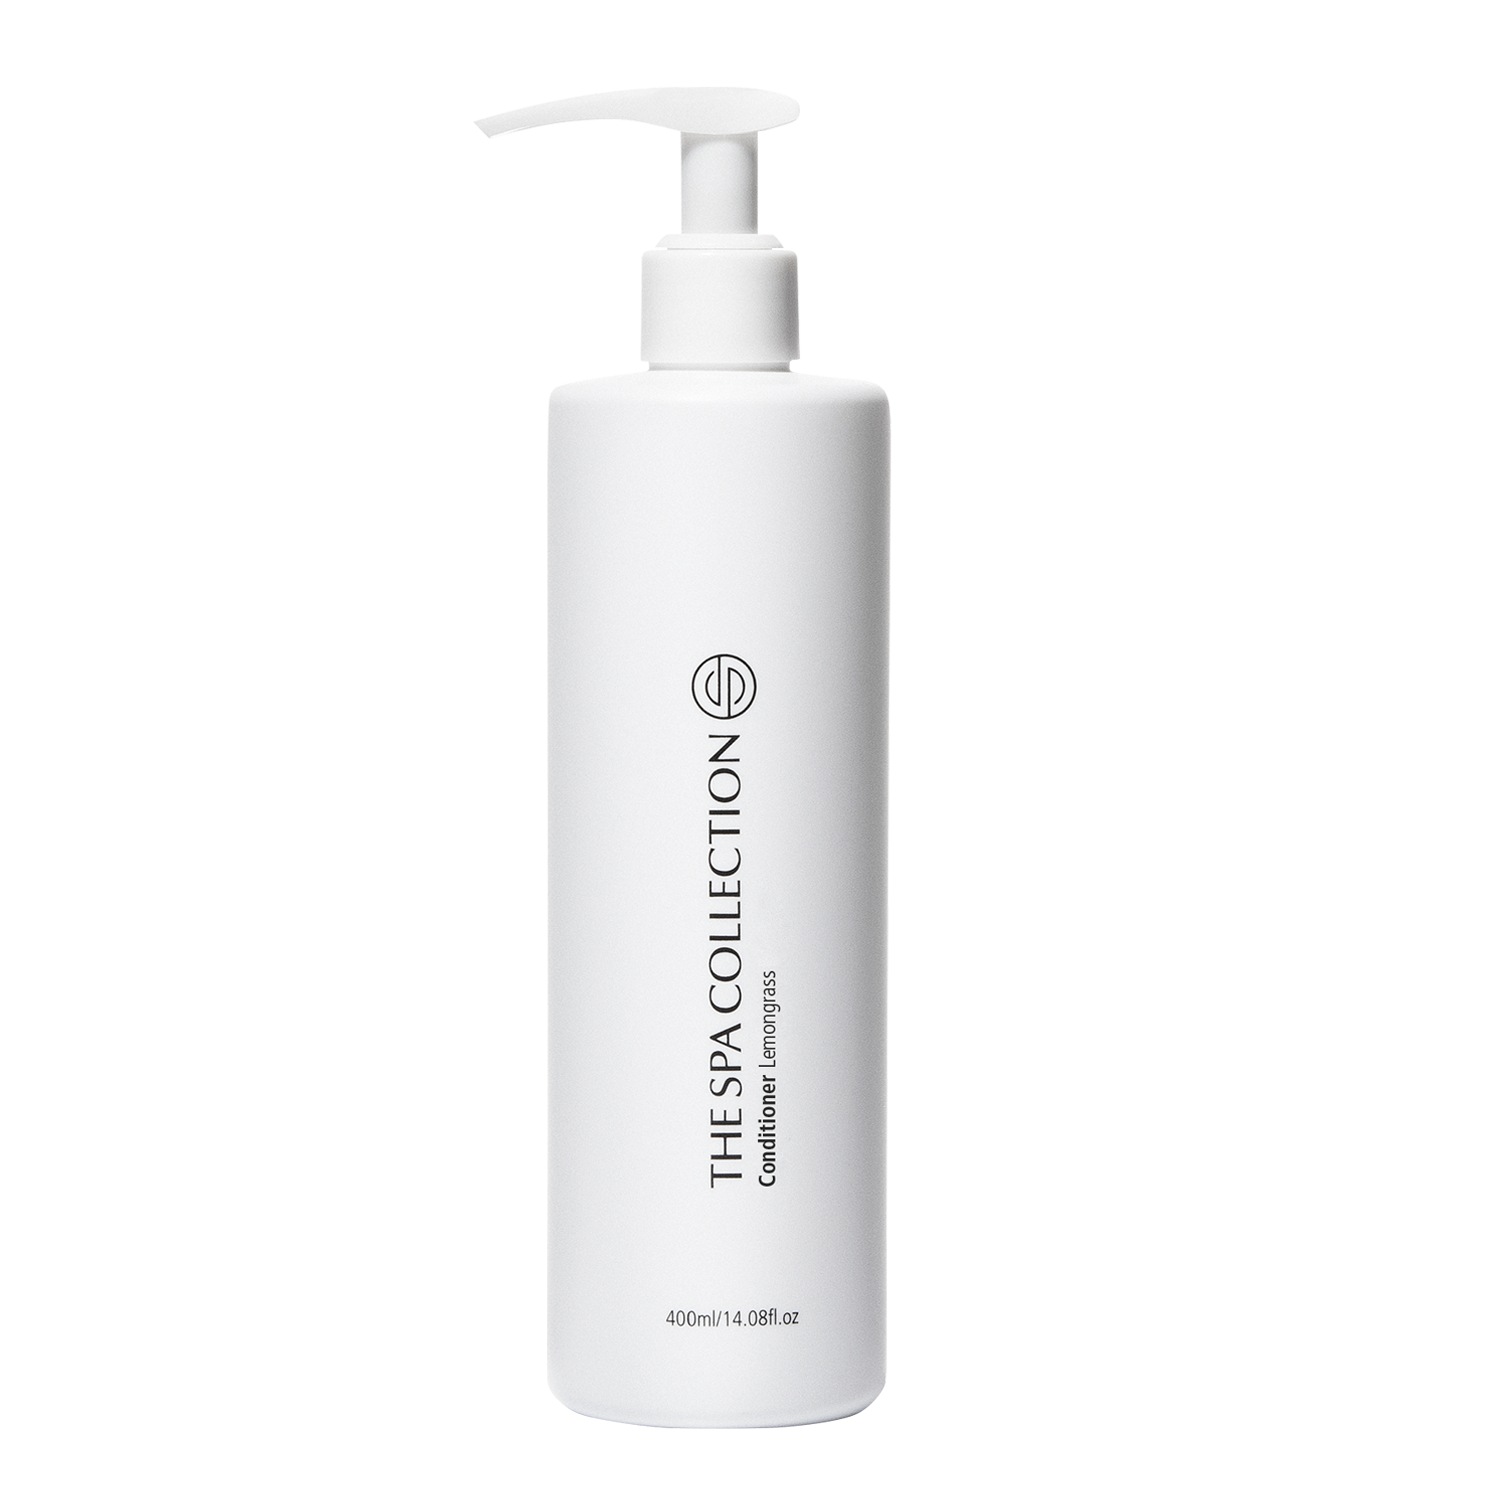 Refreshing premium hair care conditioner with Lemongrass fragrance by The Spa Collection in modern white packaging with 400ml and pump.